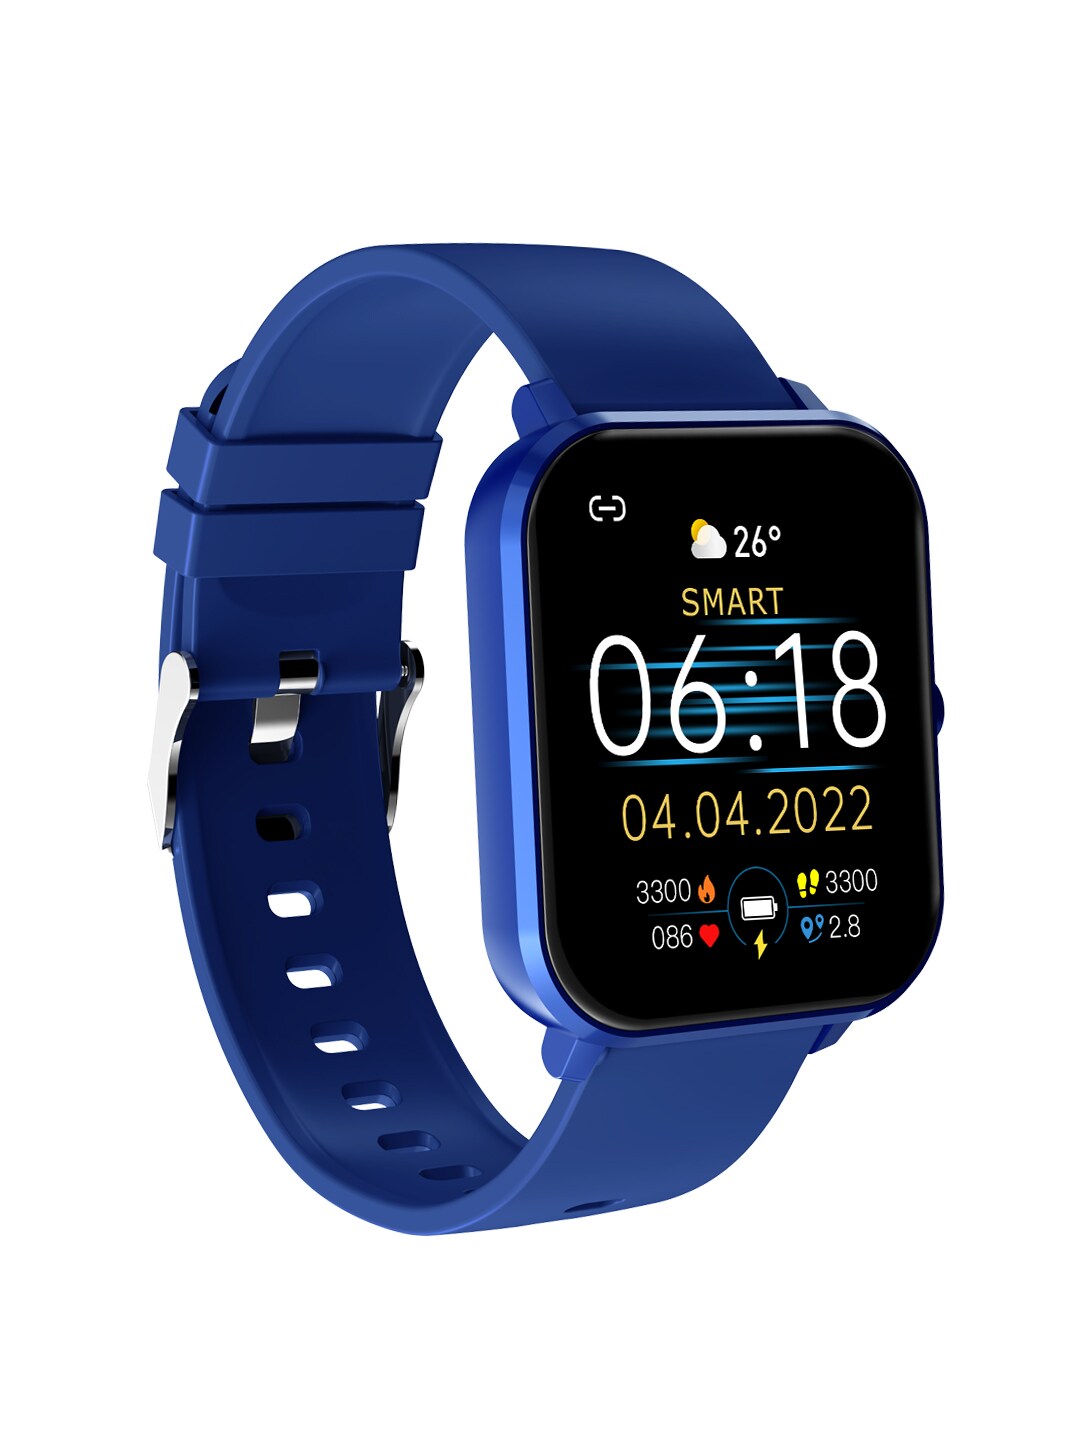 pTron Pulsefit Pro Bluetooth Calling Smartwatch with 1.69" Full Touch Screen - Blue Price in India